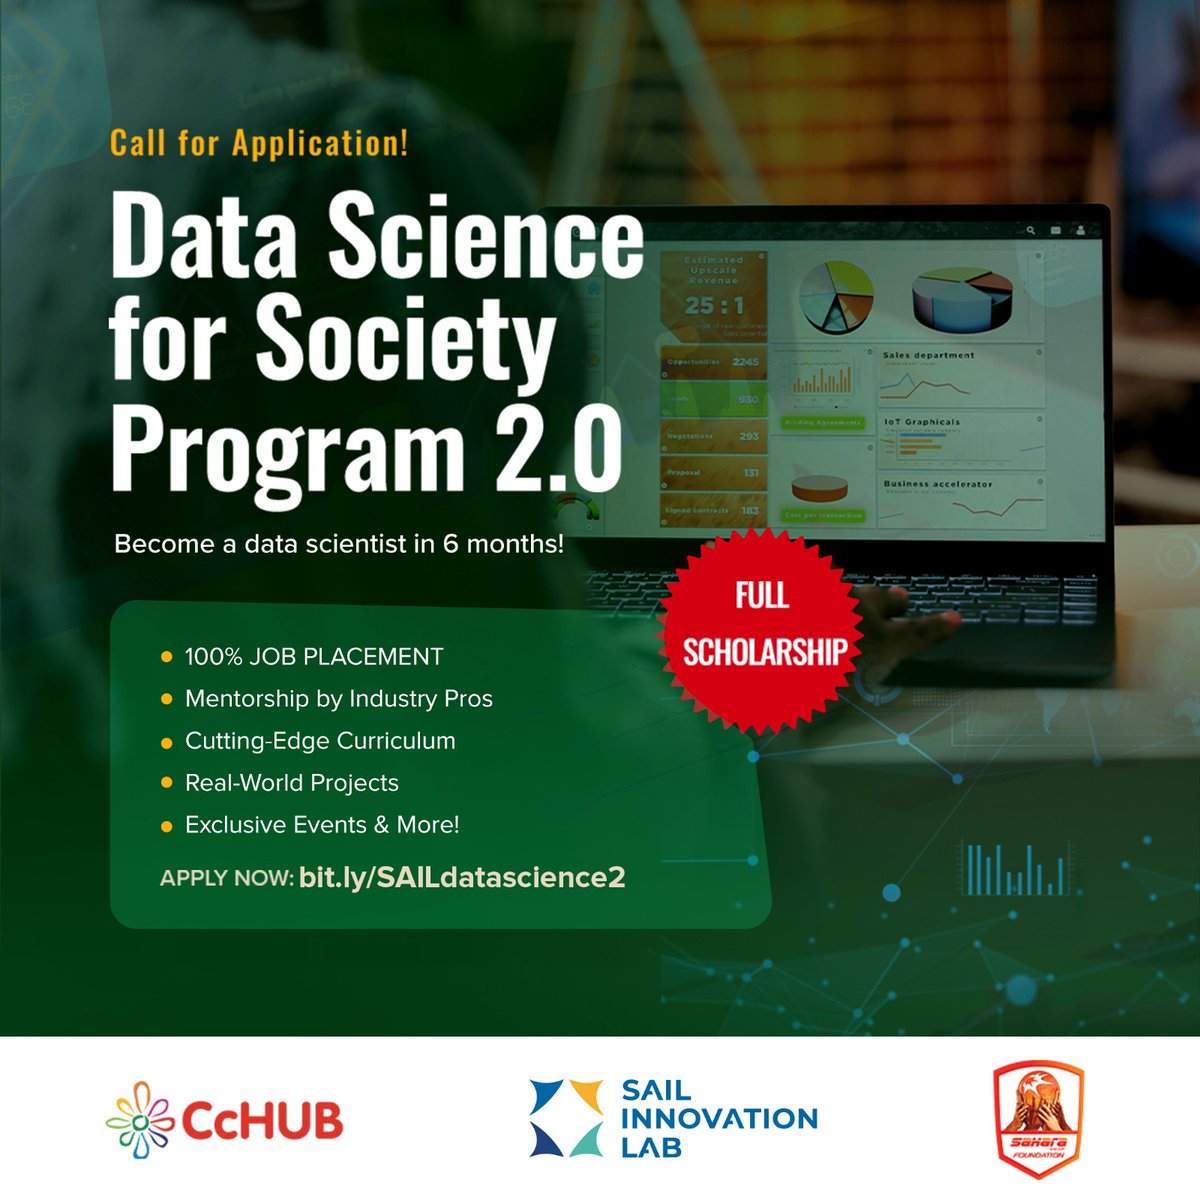 The application for the Data Science for Society Program 2.0 is currently open at @sailnigeria

Embark on the journey to become a Data Scientist in just 6 months!

Apply Now: bit.ly/SAILdatascienc…

#DoingGood